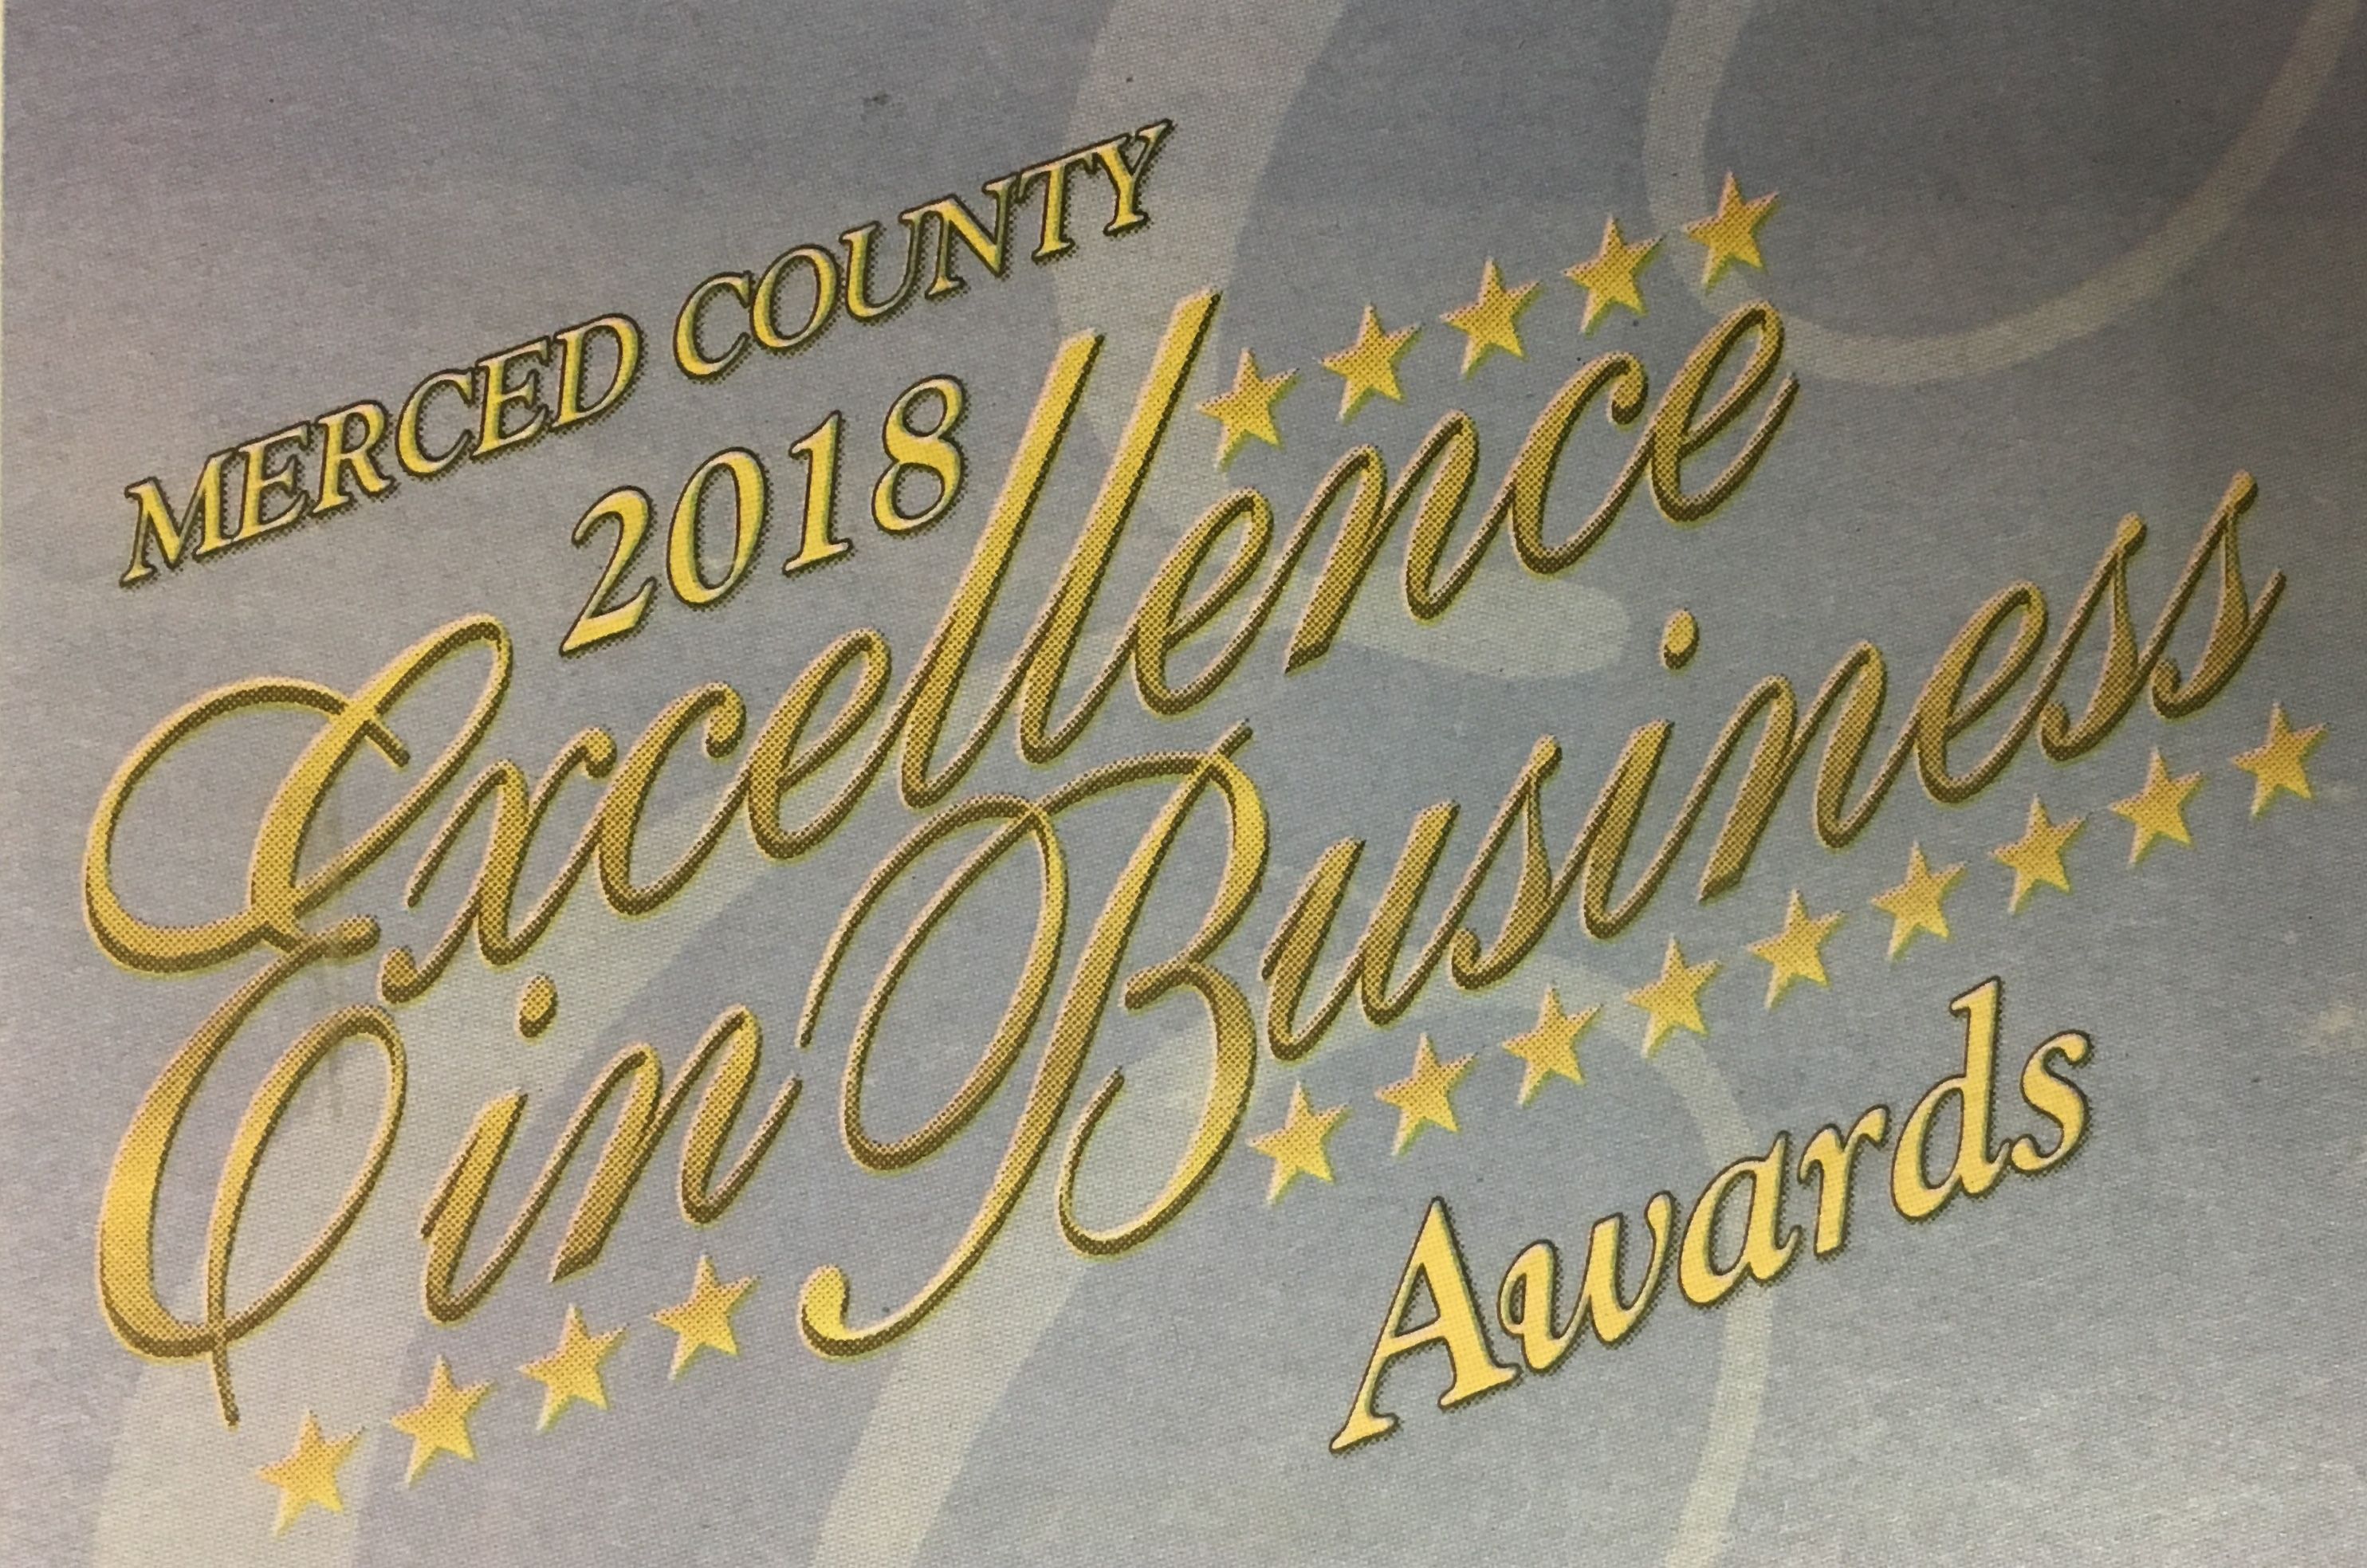 Merced County 2018 Charitable/Nonprofit Excellence in Business Award